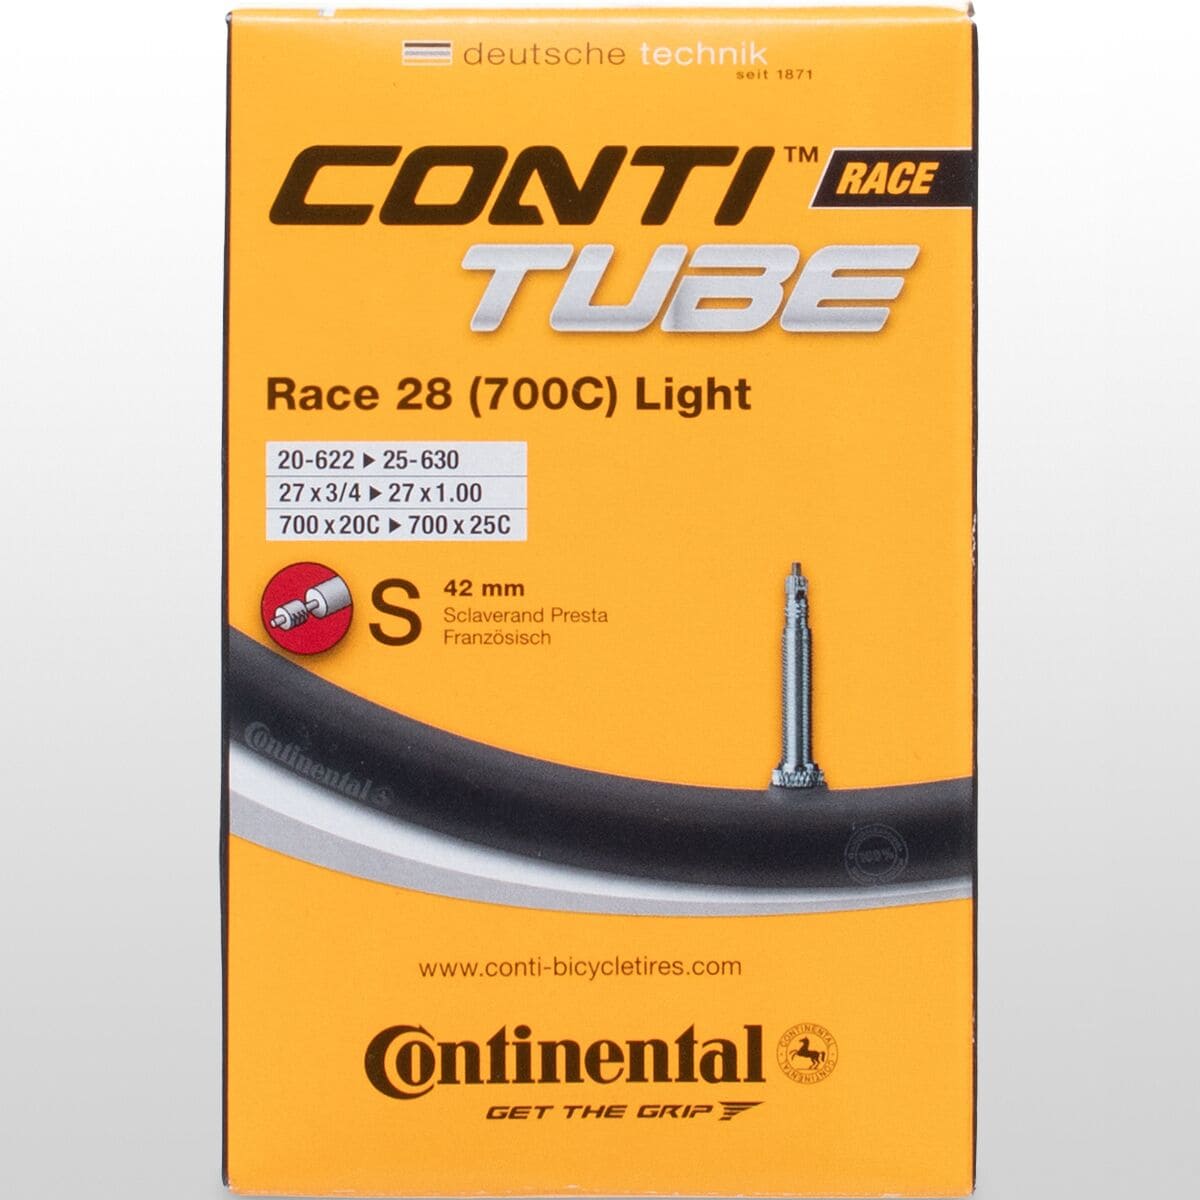 Continental Race Light Tube Components